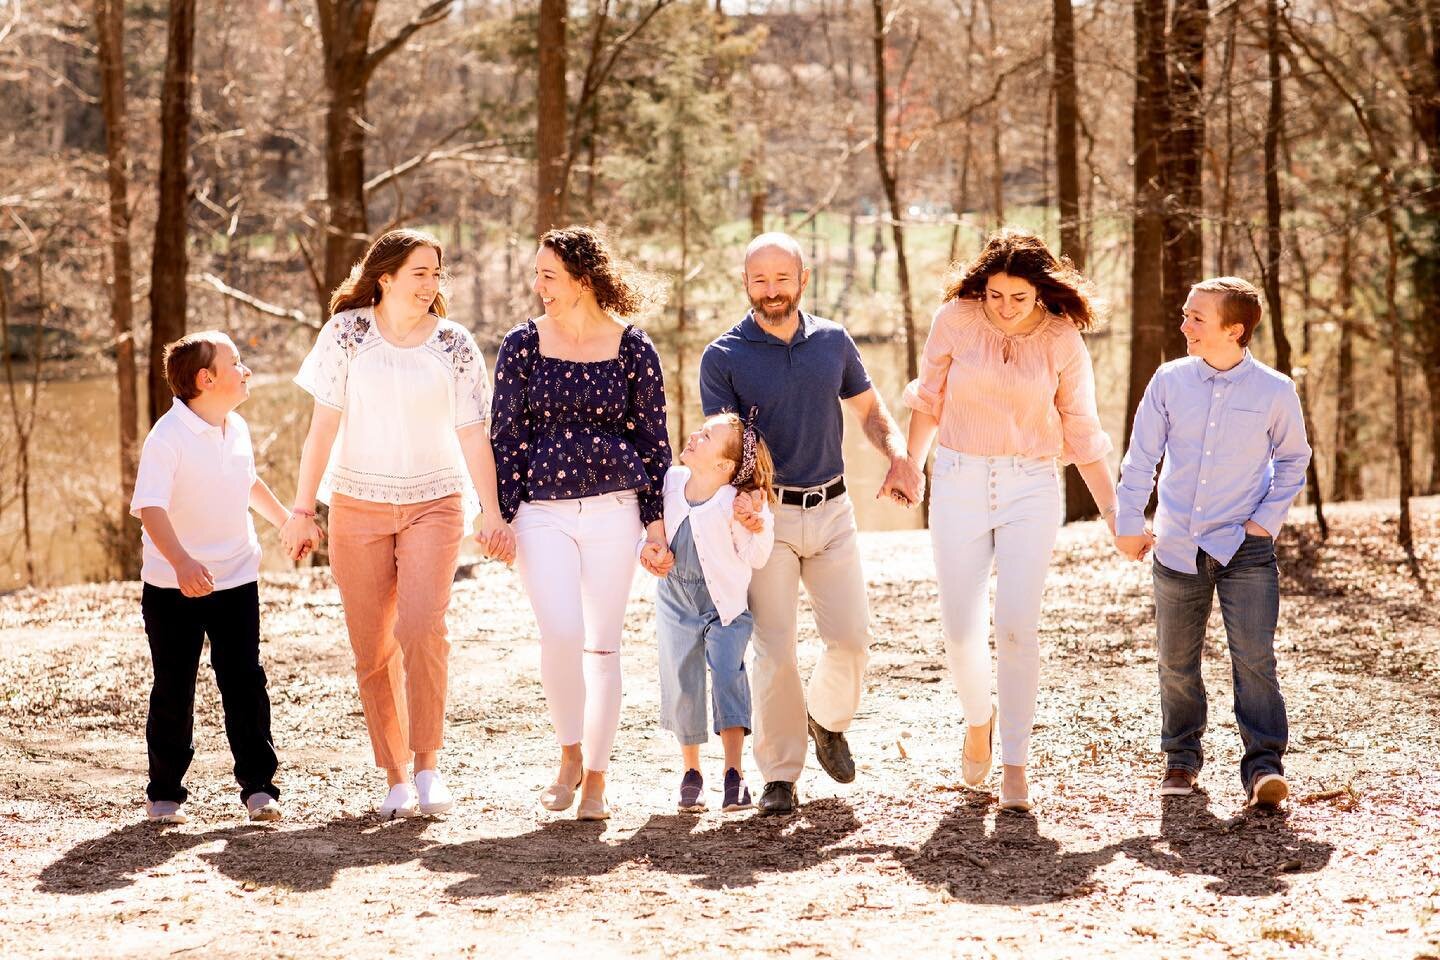 This family!! We had so much fun together! 🤩🤩 

#katiespataphotography #charlottenc #charlottefamilyphotography #charlottefamilyphotographer #cltfamilyphotography #charlottephotographer #clickinmoms #clickmagazine #charlotteweddingphotography #char